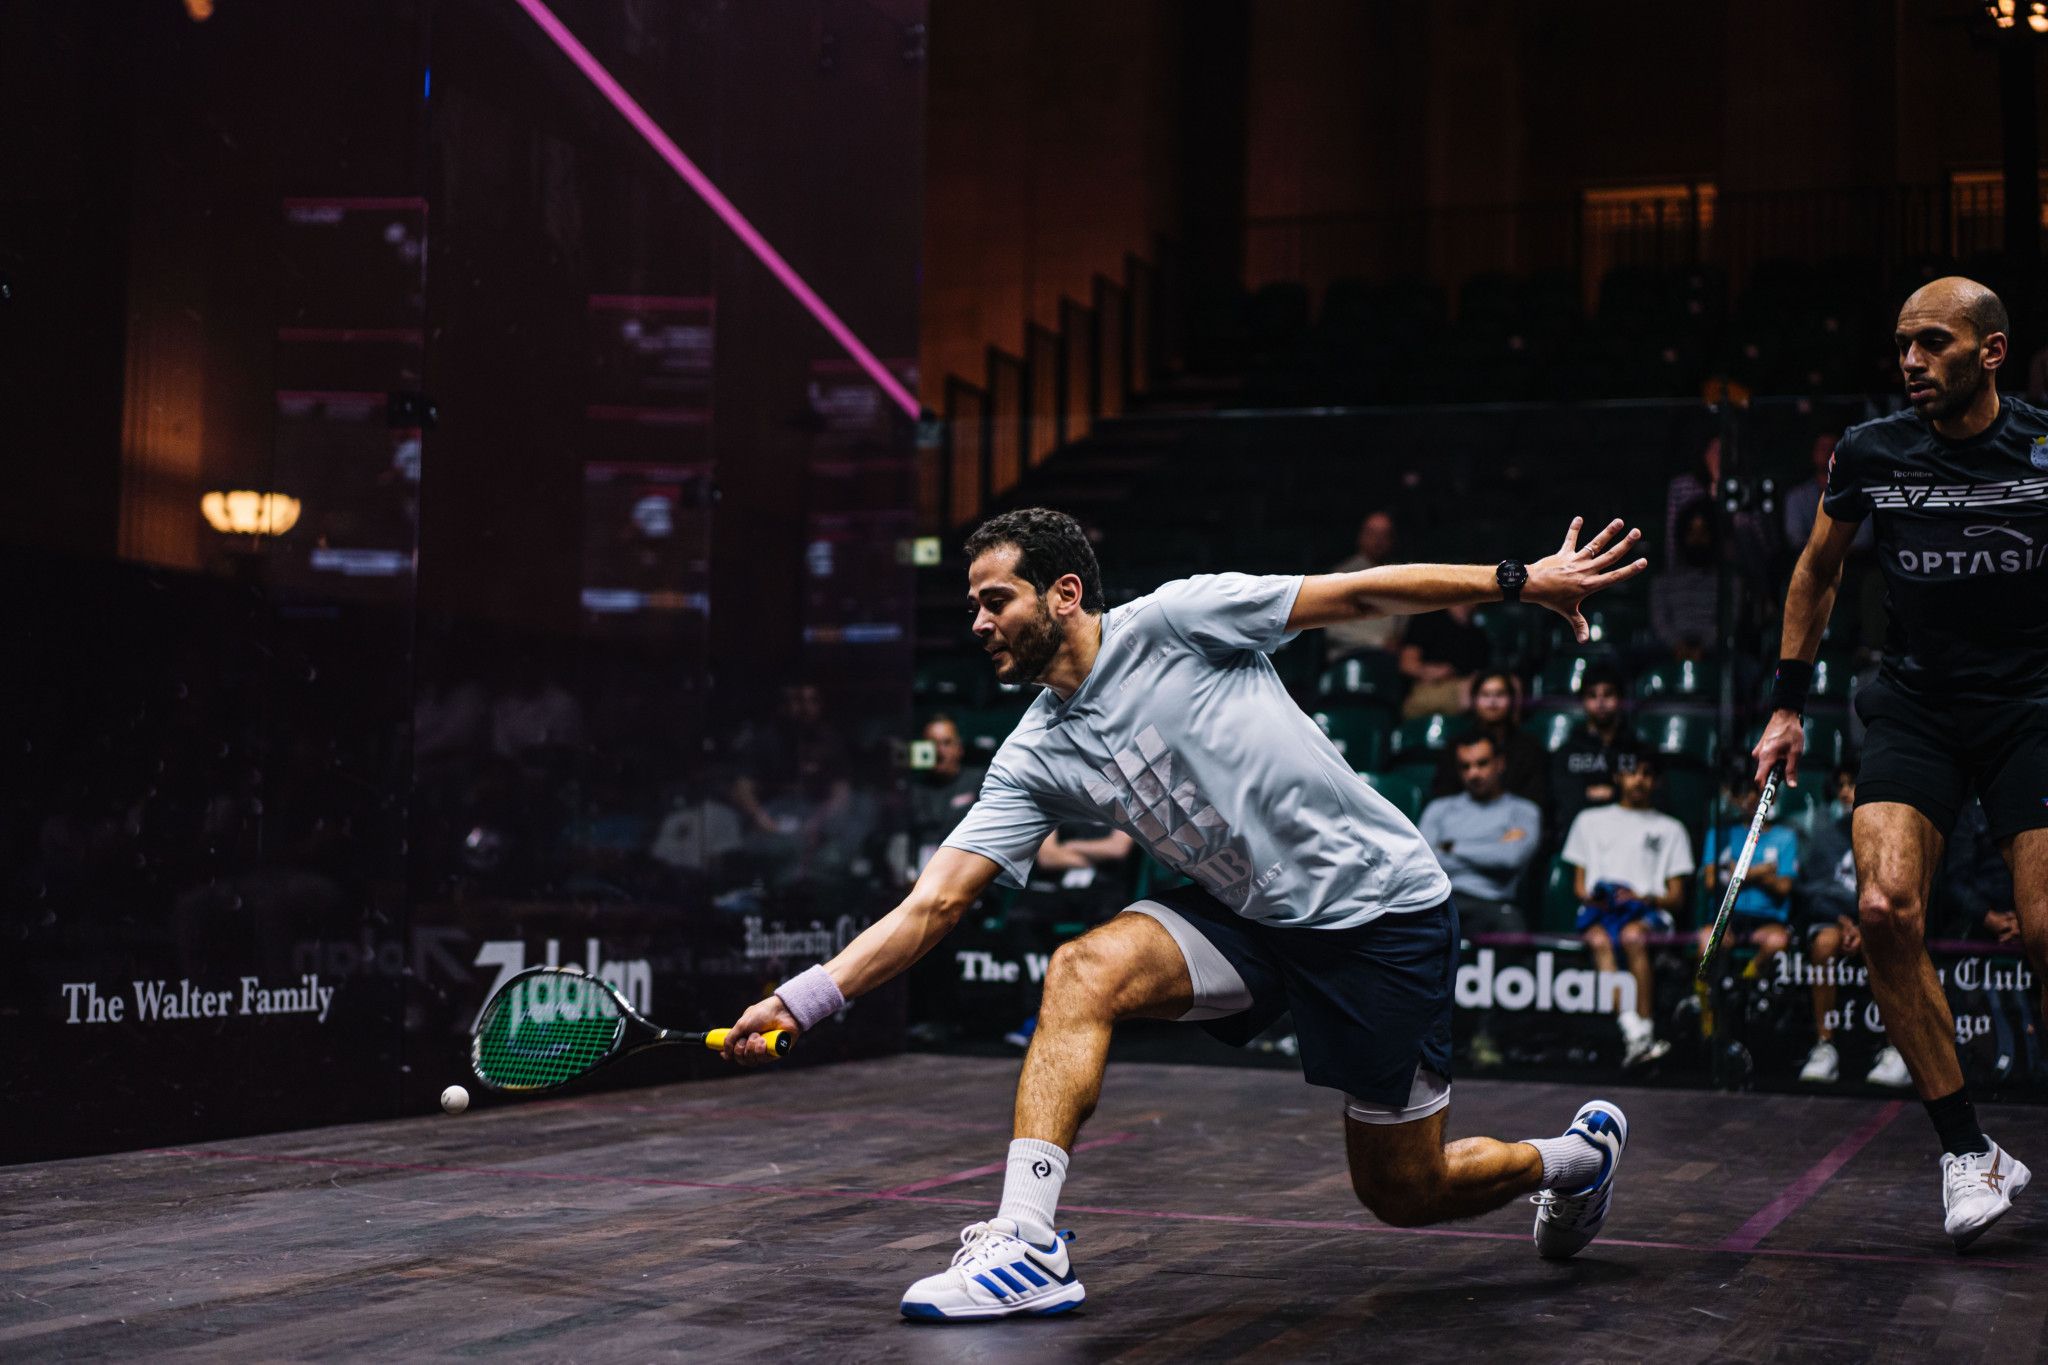 Karim Abdel Gawad took a shock 3-0 victory against sixth seed Marwan El Shorbagy in just 28 minutes in an all-Egyptian clash ©PSA